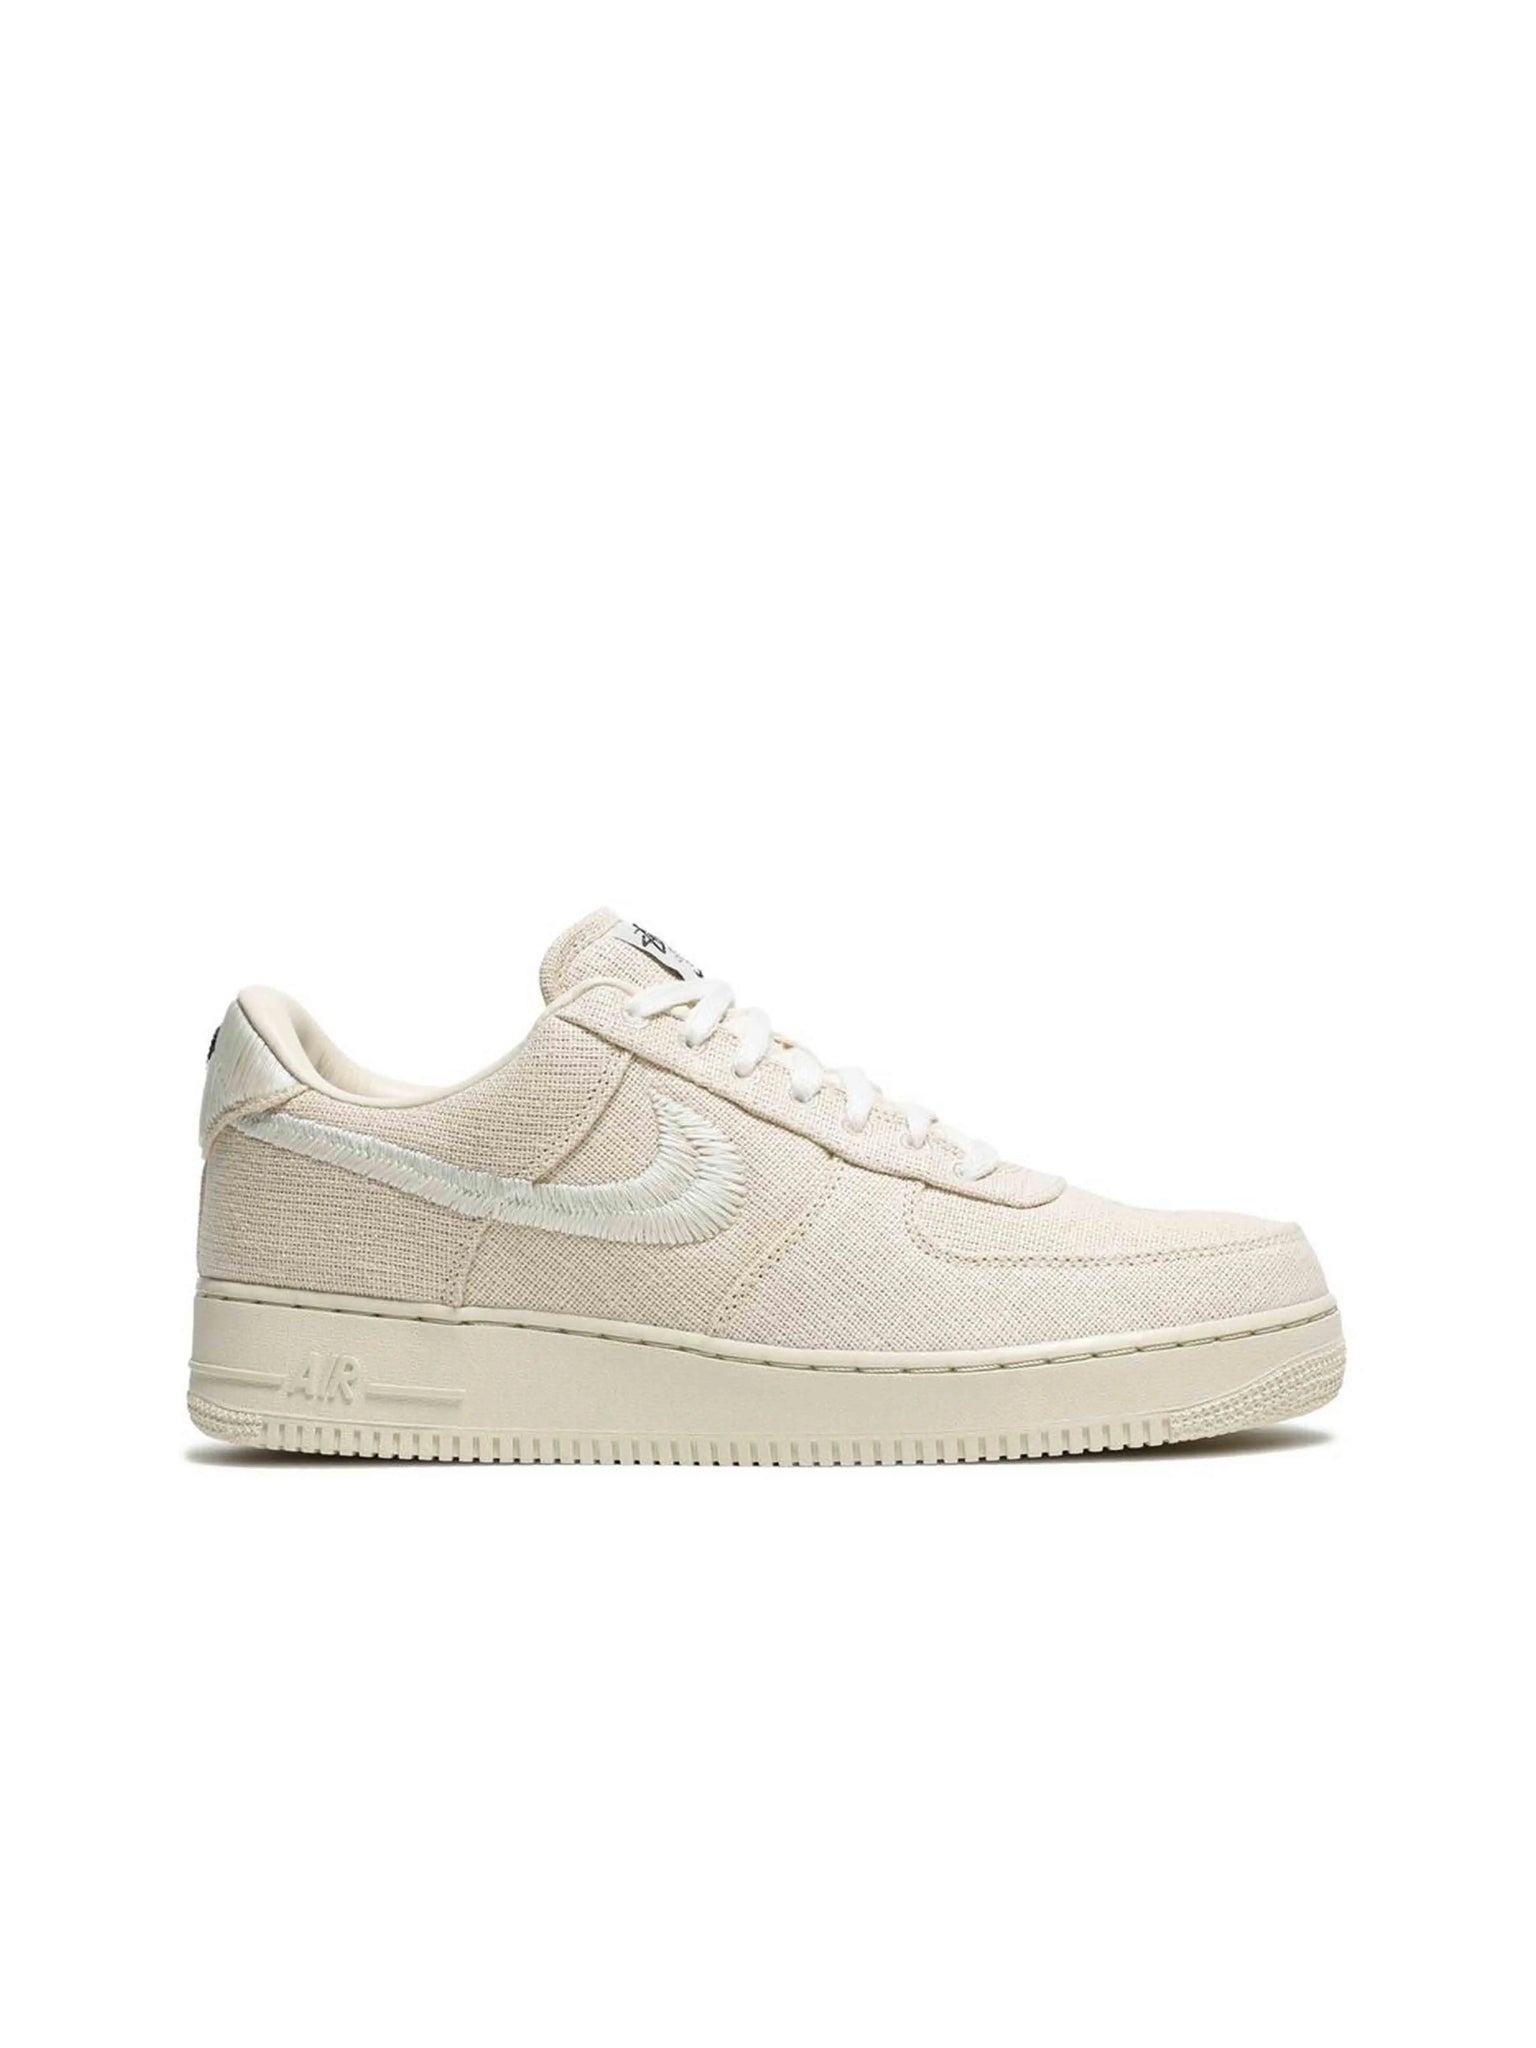 Nike Air Force 1 Low Stussy Fossil Prior